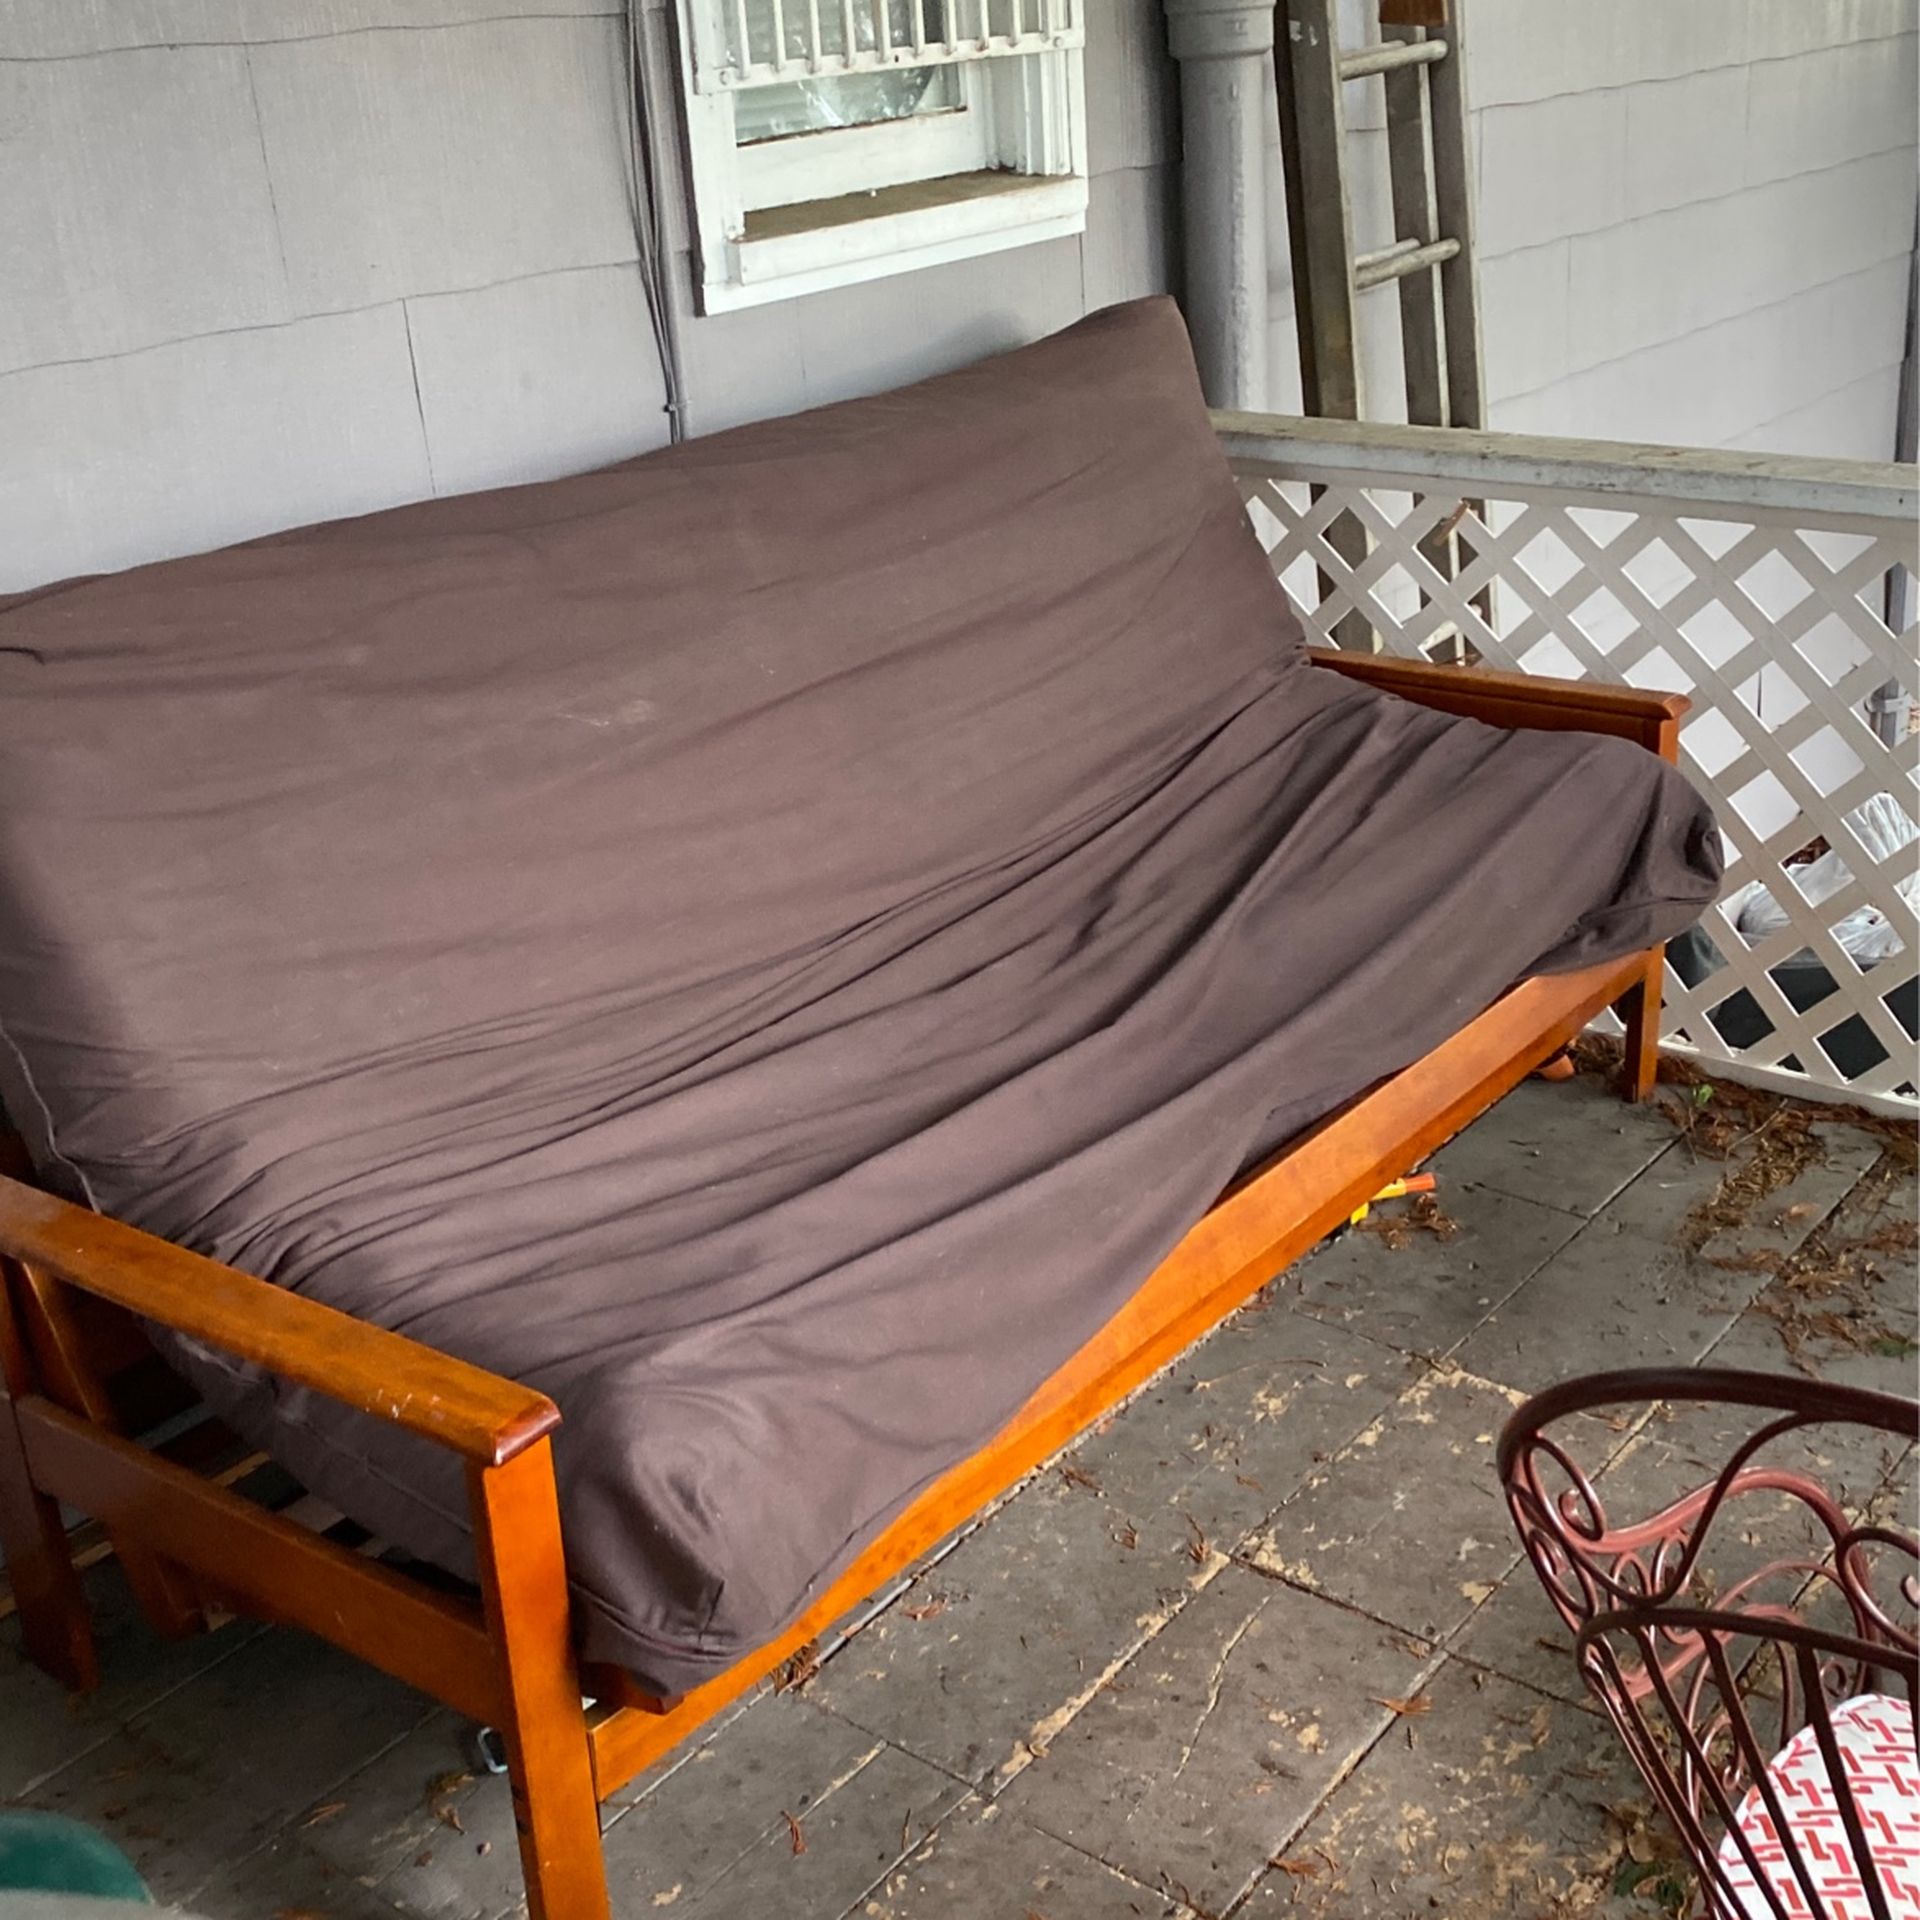 Wood Framed Futon With Mattress And Brown Cover. Seats 3 Comfortably.